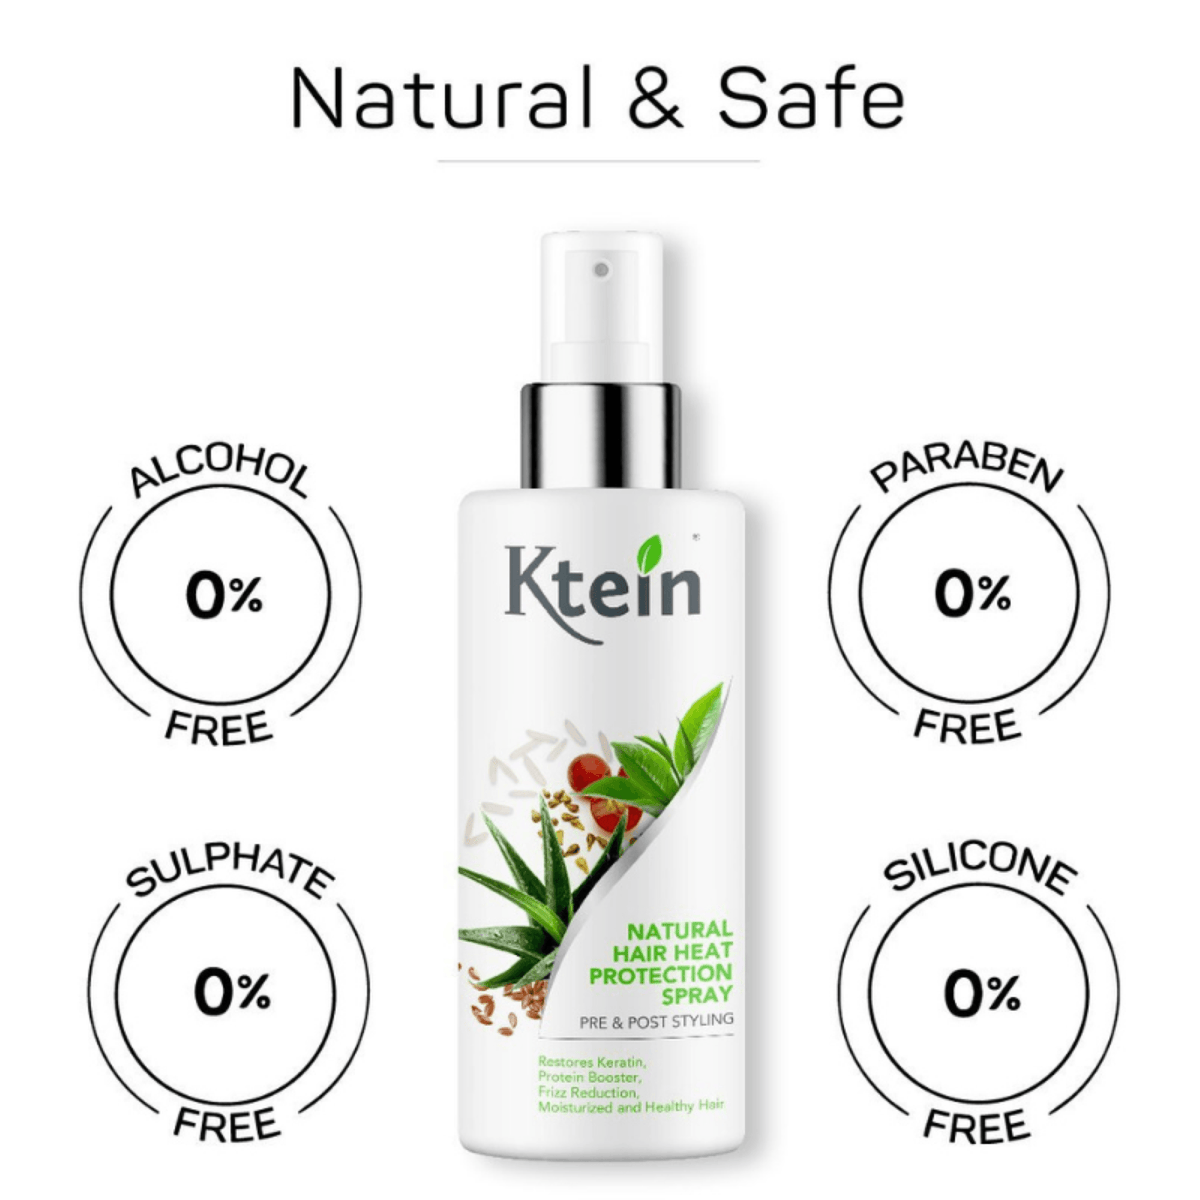 Ktein Natural Hair Styling Kit - Ktein Cosmetics By Ktein Biotech Private Limited